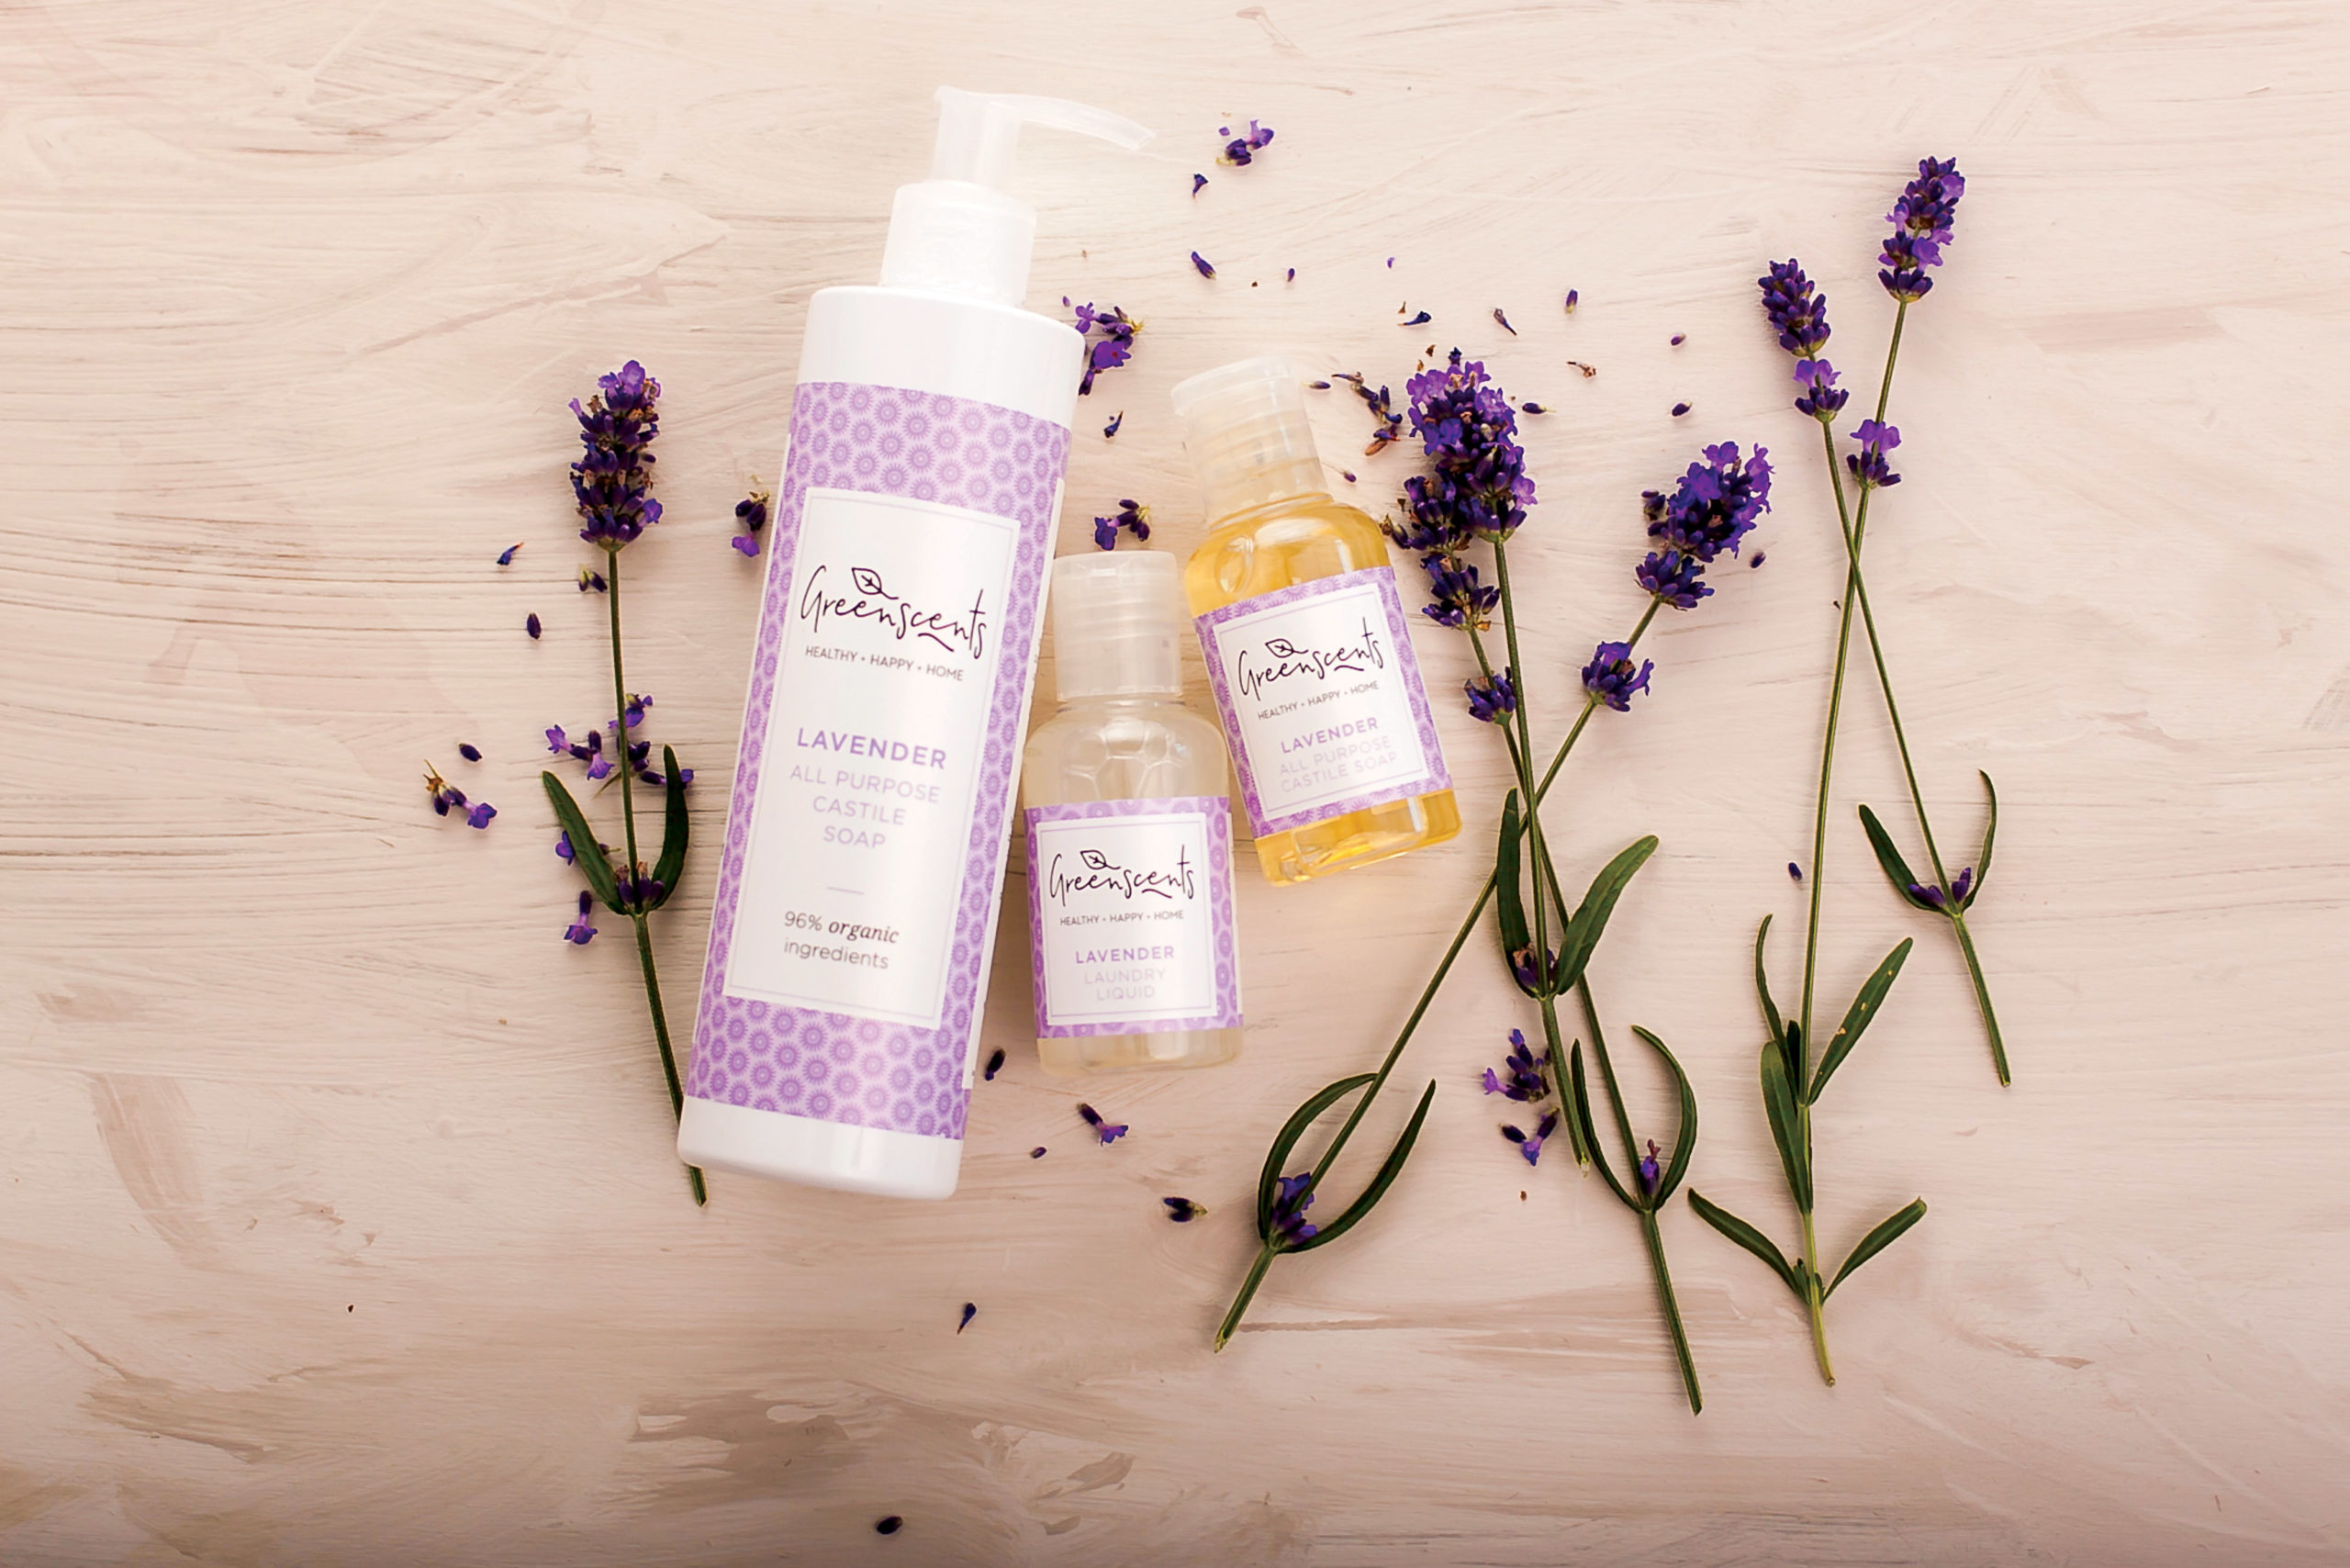 Greenscents lavender eco cleaning products